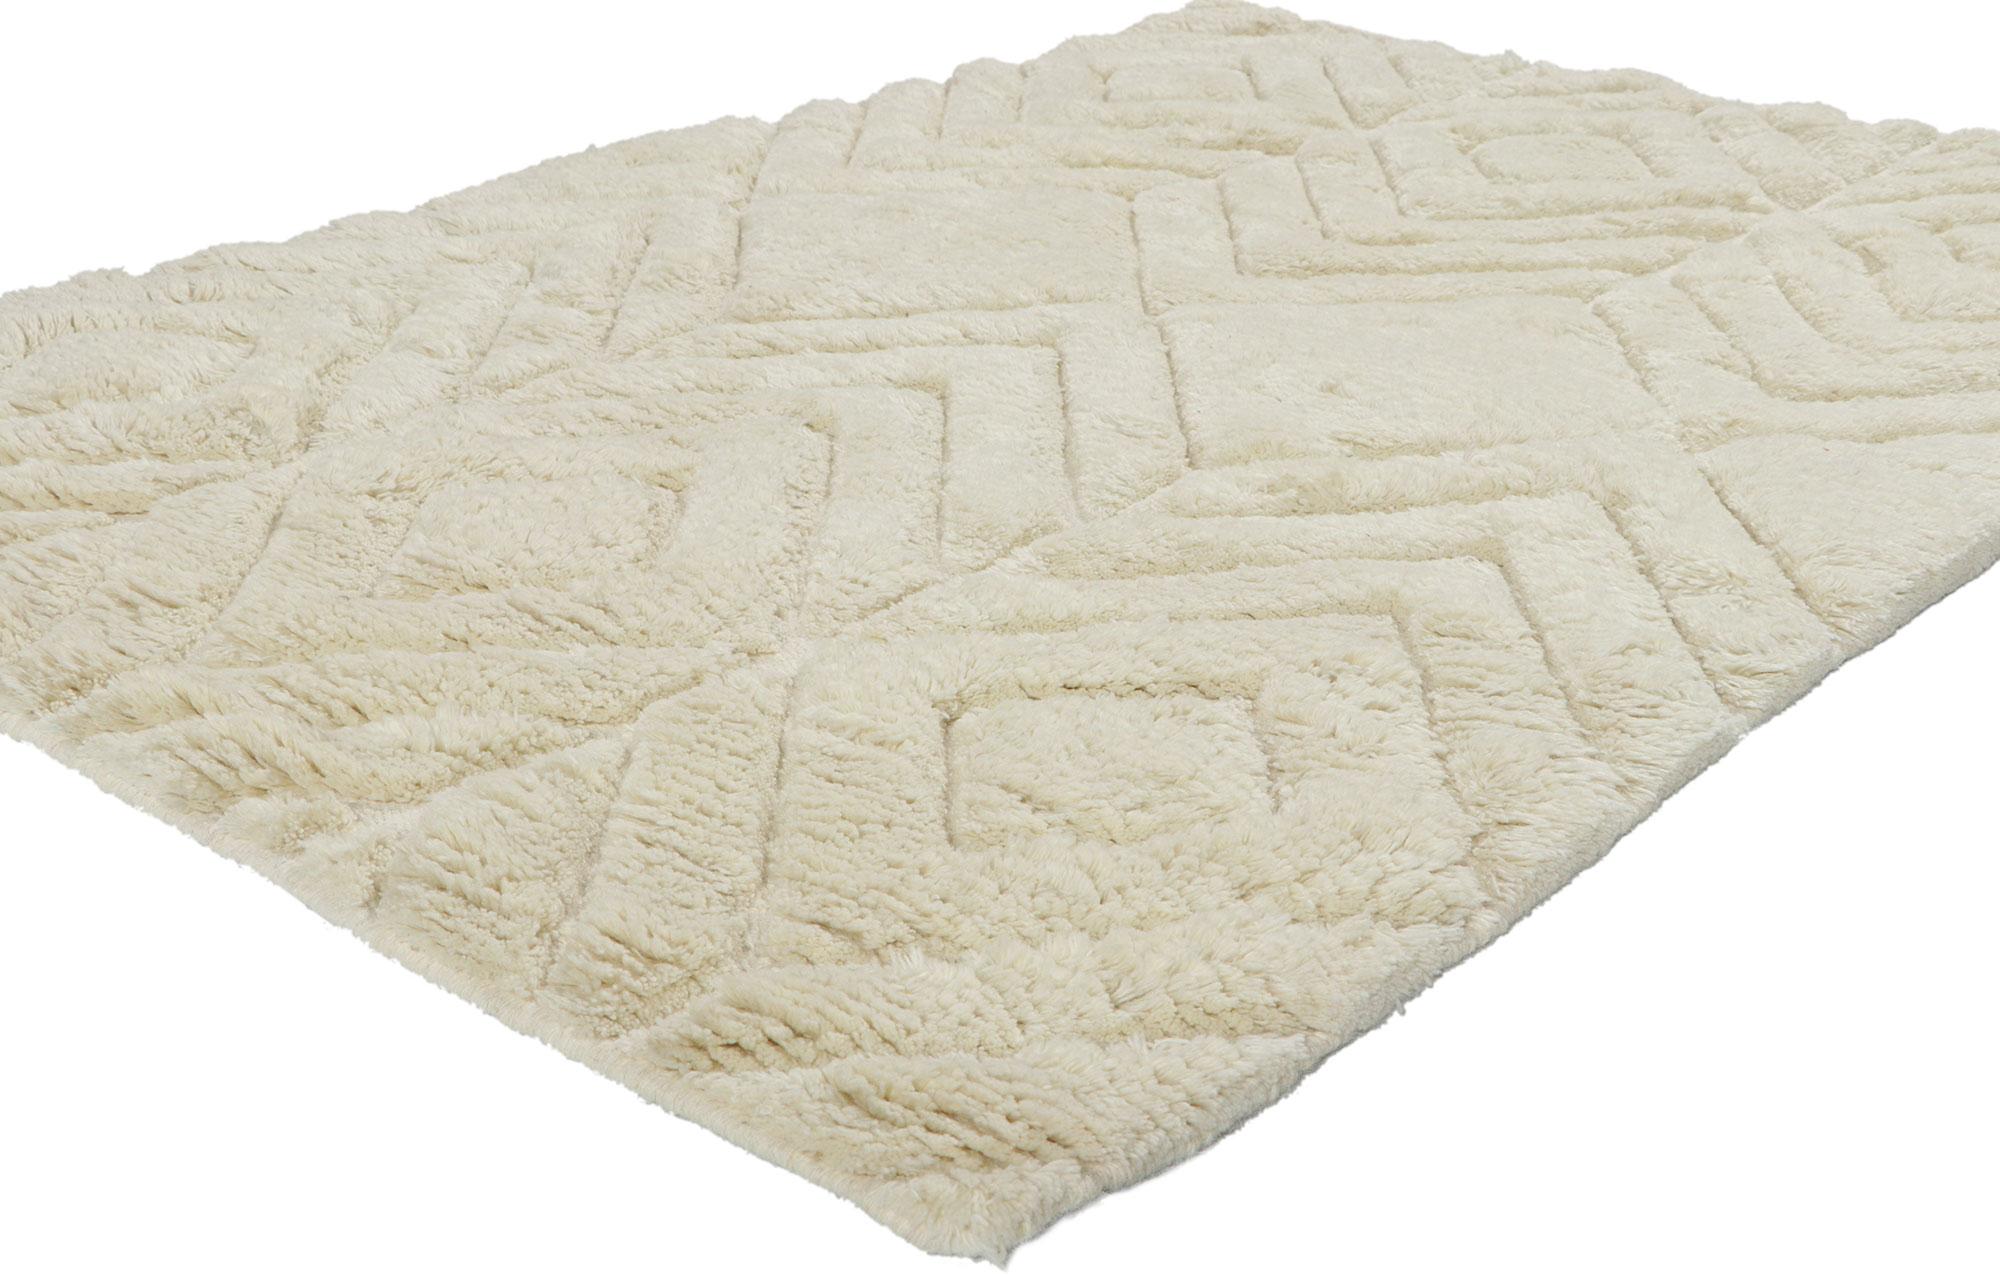 30905 New Moroccan style high-low ivory rug, 04'02 x 06'00. With its simplicity, plush pile, incredible detail and texture, this hand knotted wool contemporary Moroccan rug is a captivating vision of woven beauty. The abrashed field features an